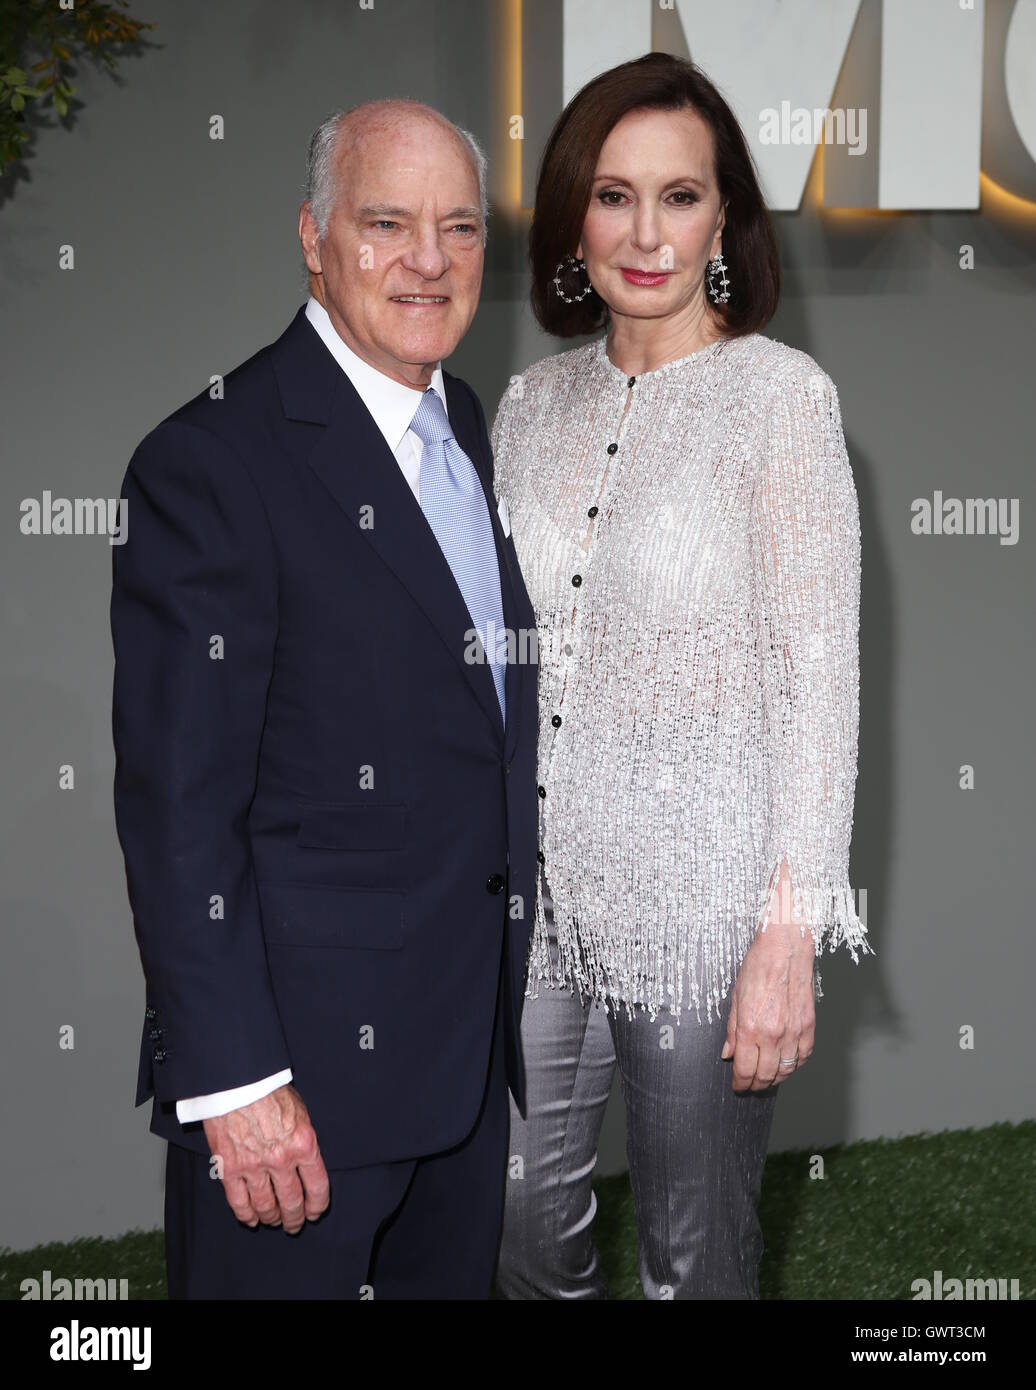 The Museum of Modern Art's Party in the Garden - Arrivals  Featuring: Henry Kravis, MARIE-JOSÉE KRAVIS Where: New York, United States When: 01 Jun 2016 Stock Photo